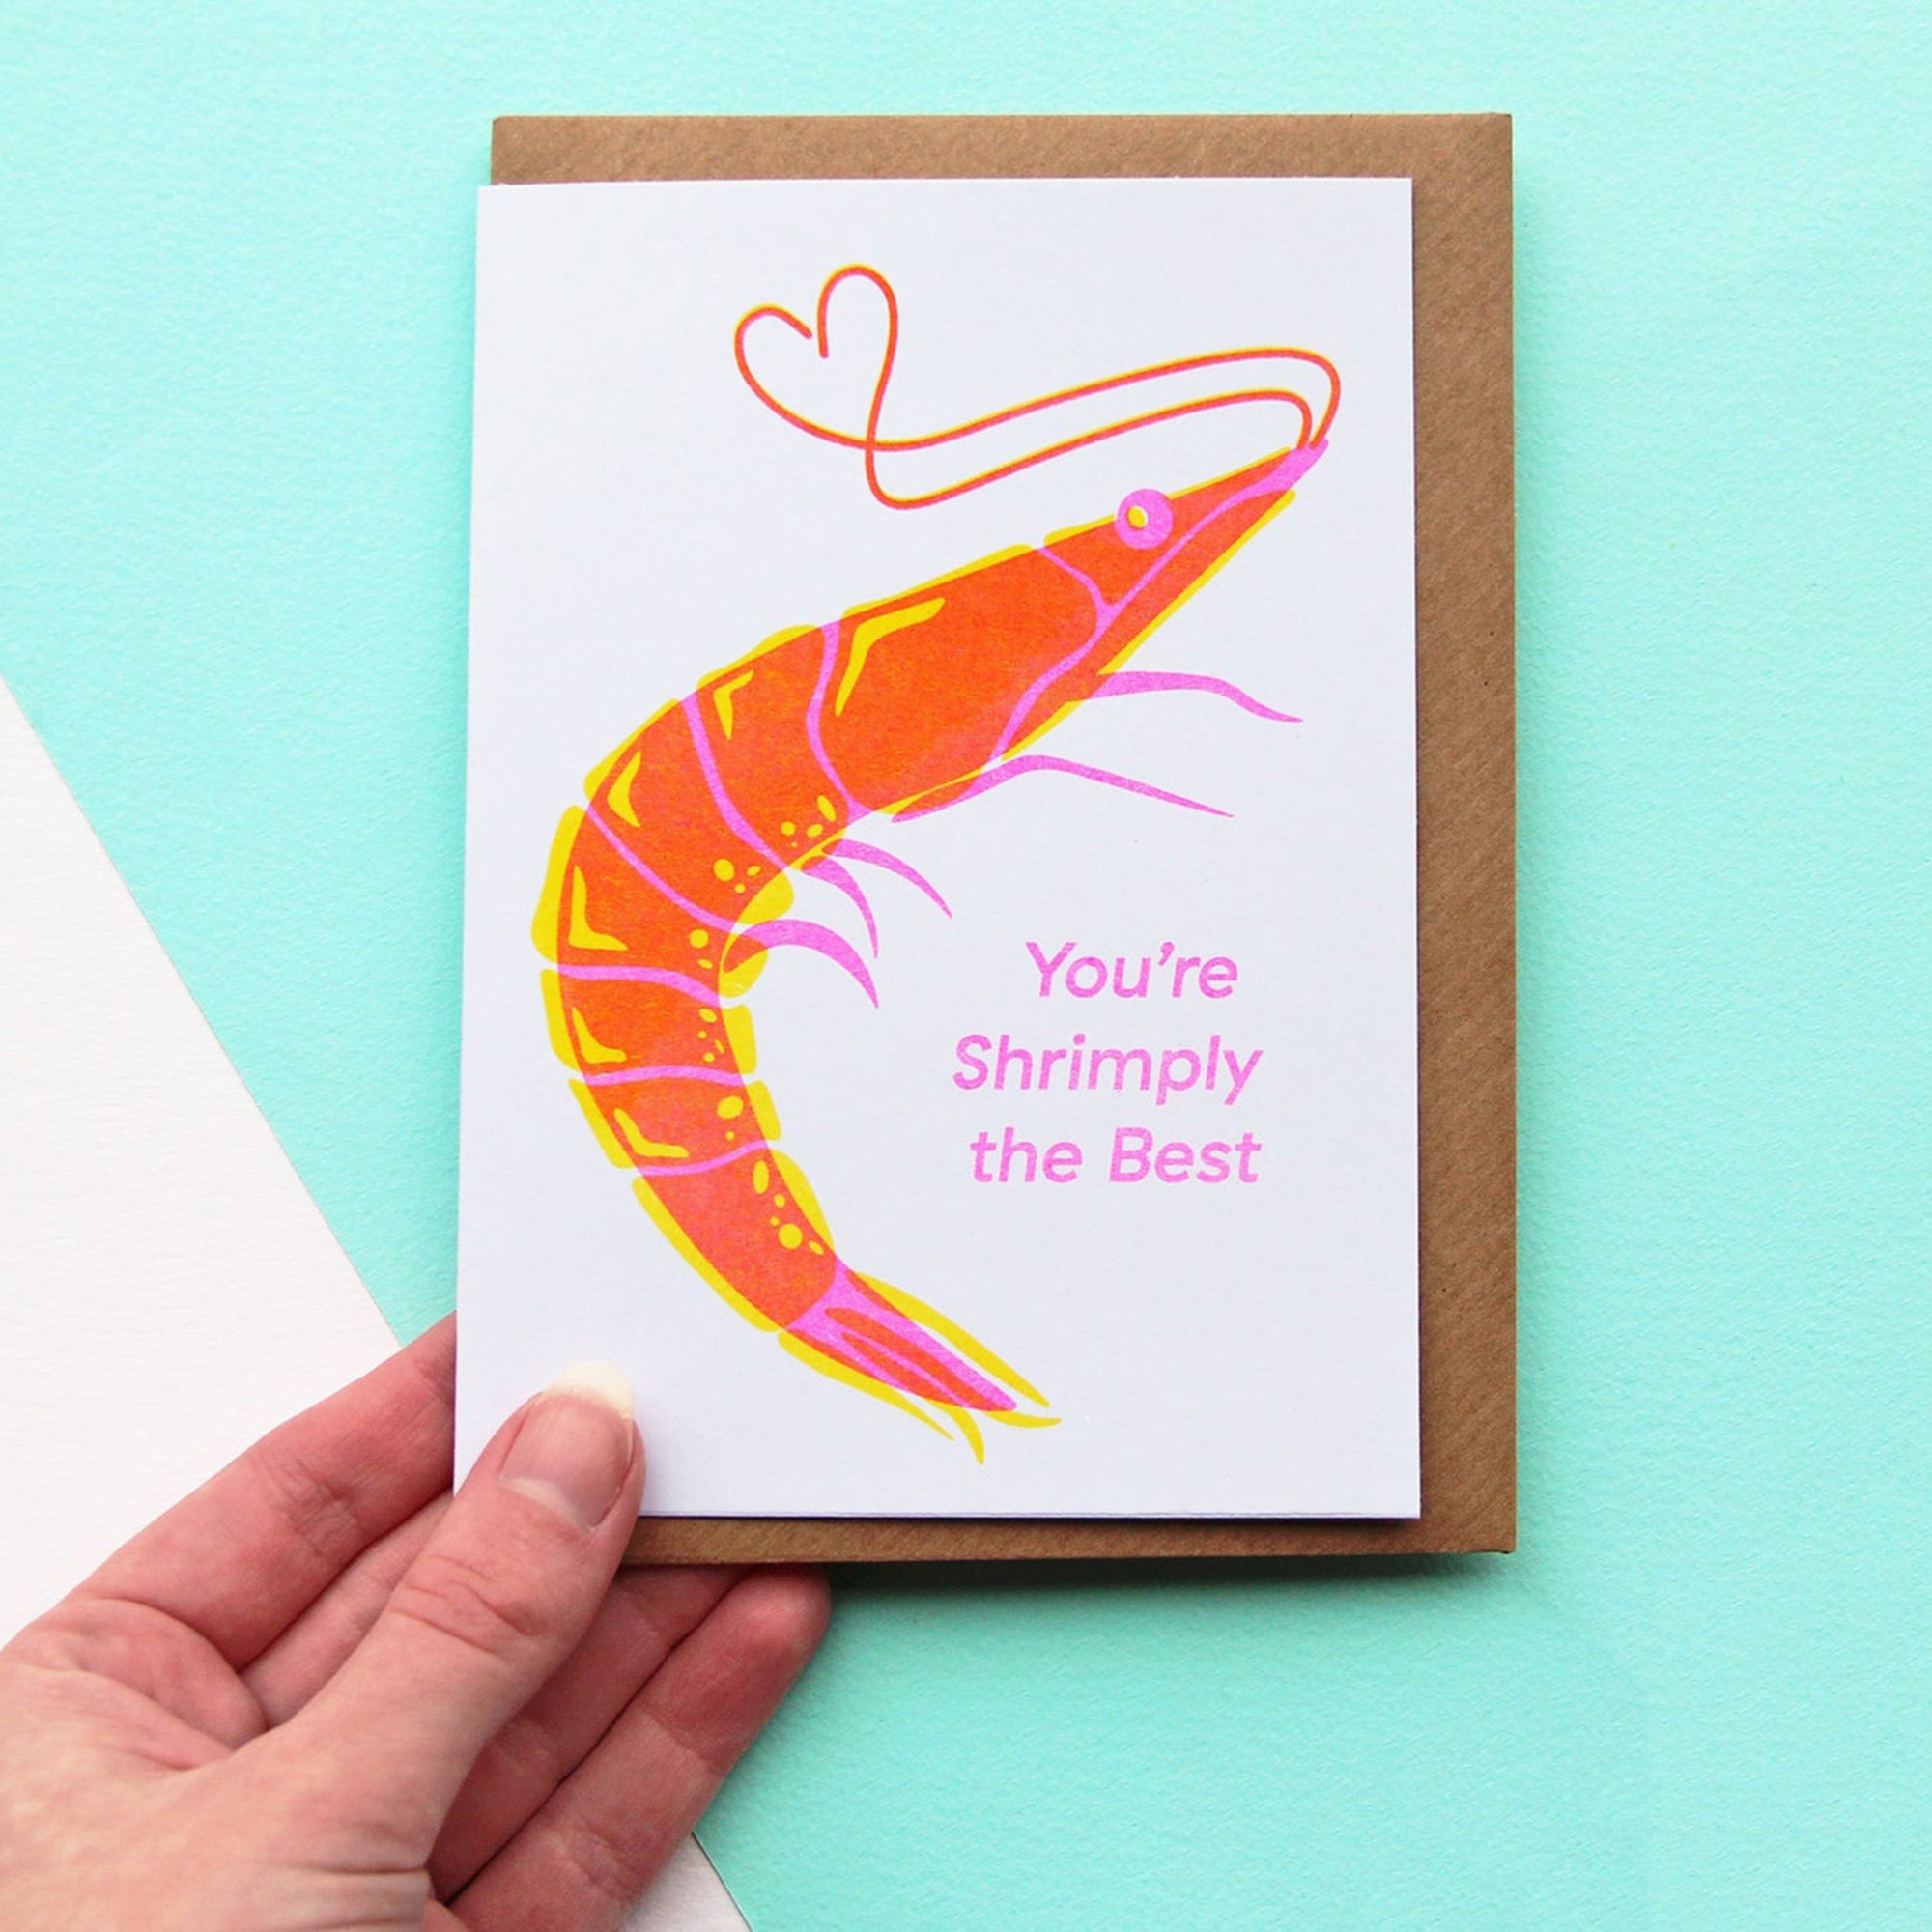 Shrimply the best greetings card